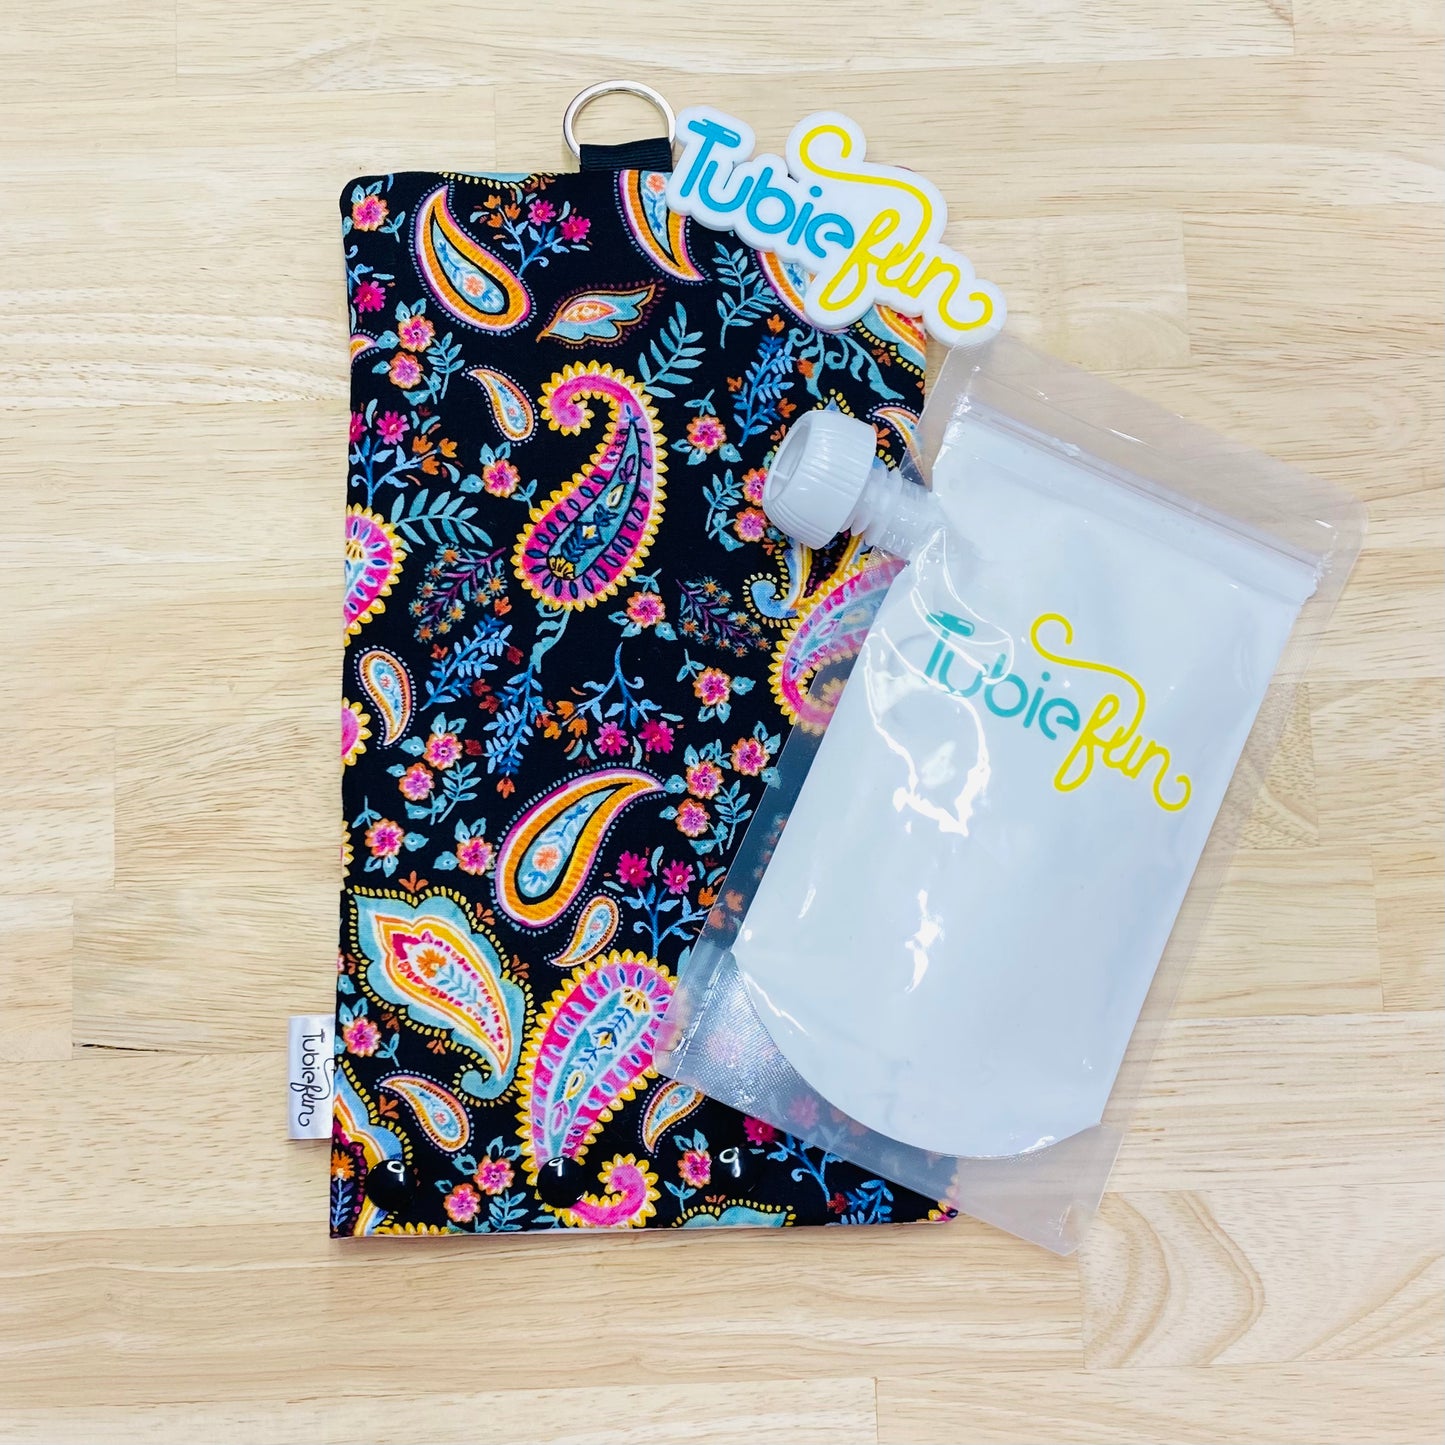 NEW Insulated Milk Bag Suitable for Tubie Fun 500ml Reusable Pouches - Paisley